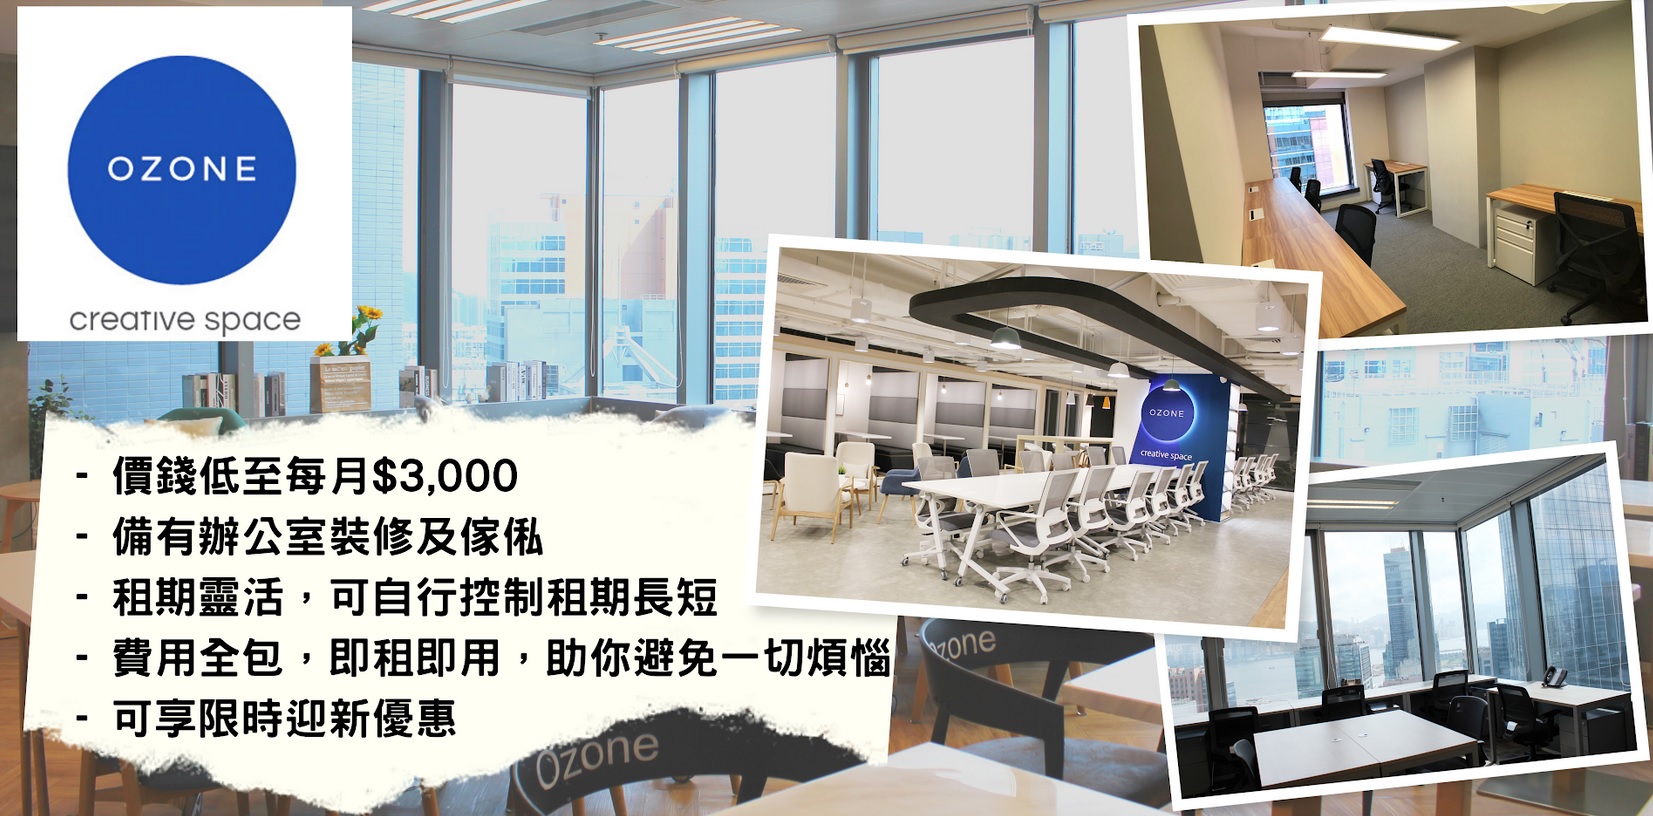 Ozone Kowloon East Kwun Tong Recommended Popularity Co-working Space Co-working space